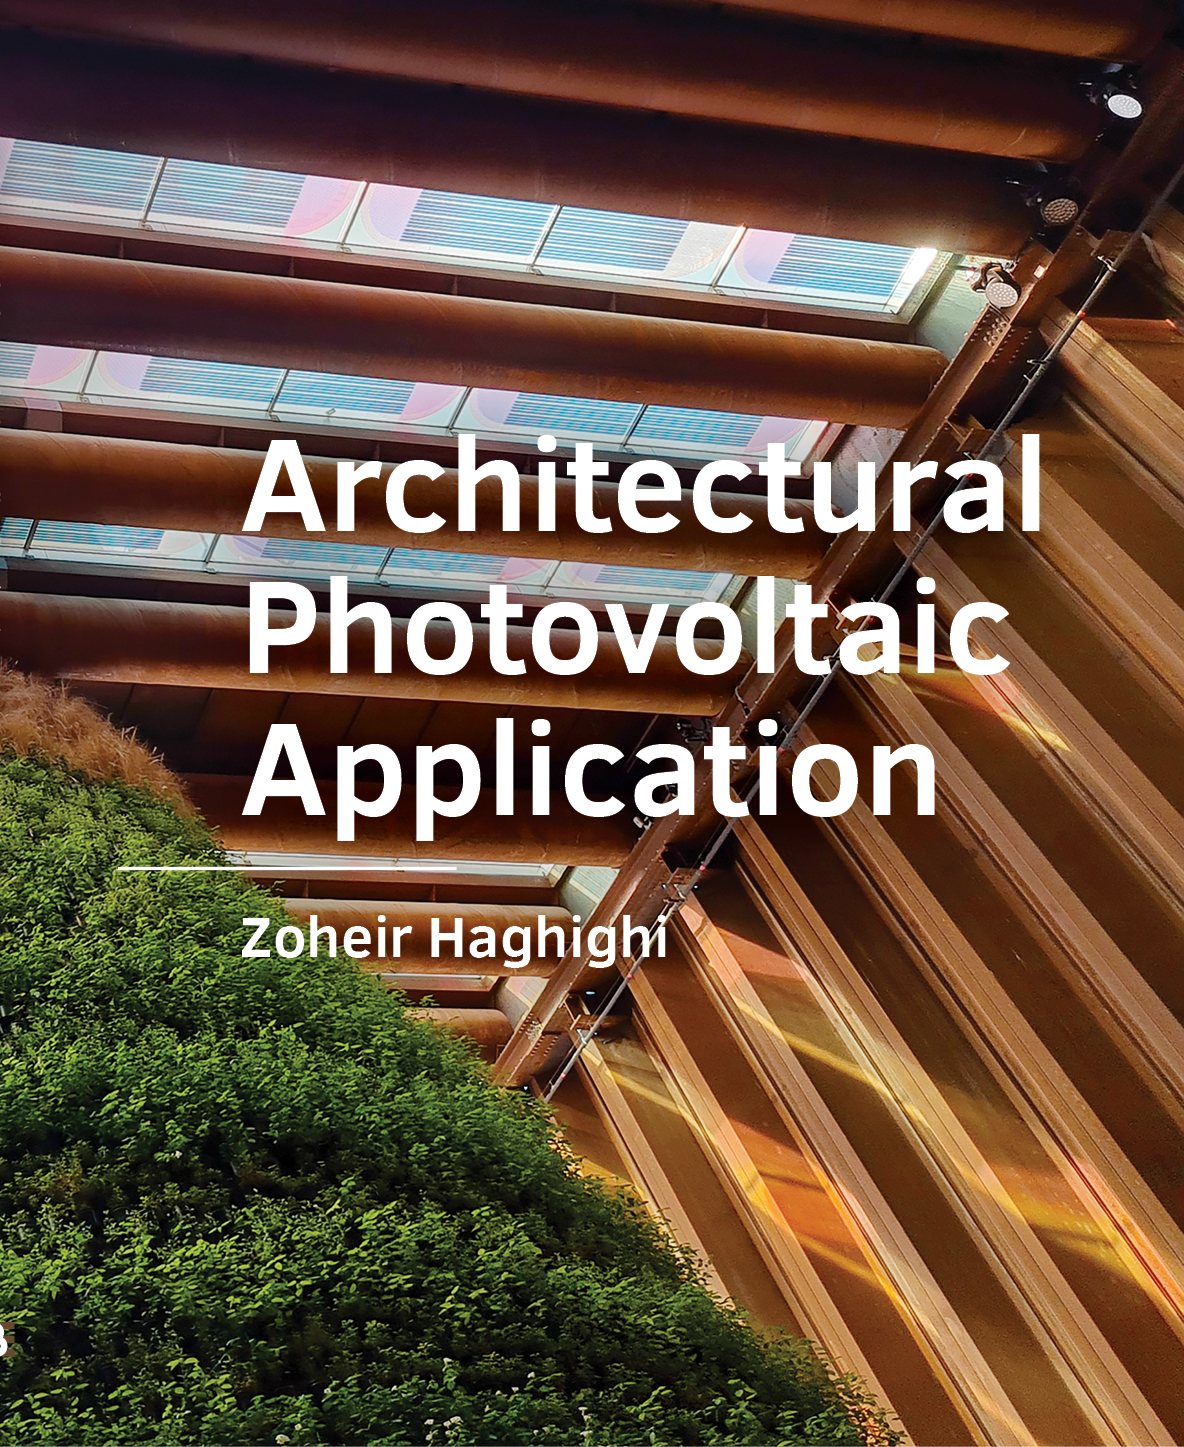 					View No. 20 (2022): Architectural Photovoltaic Application
				